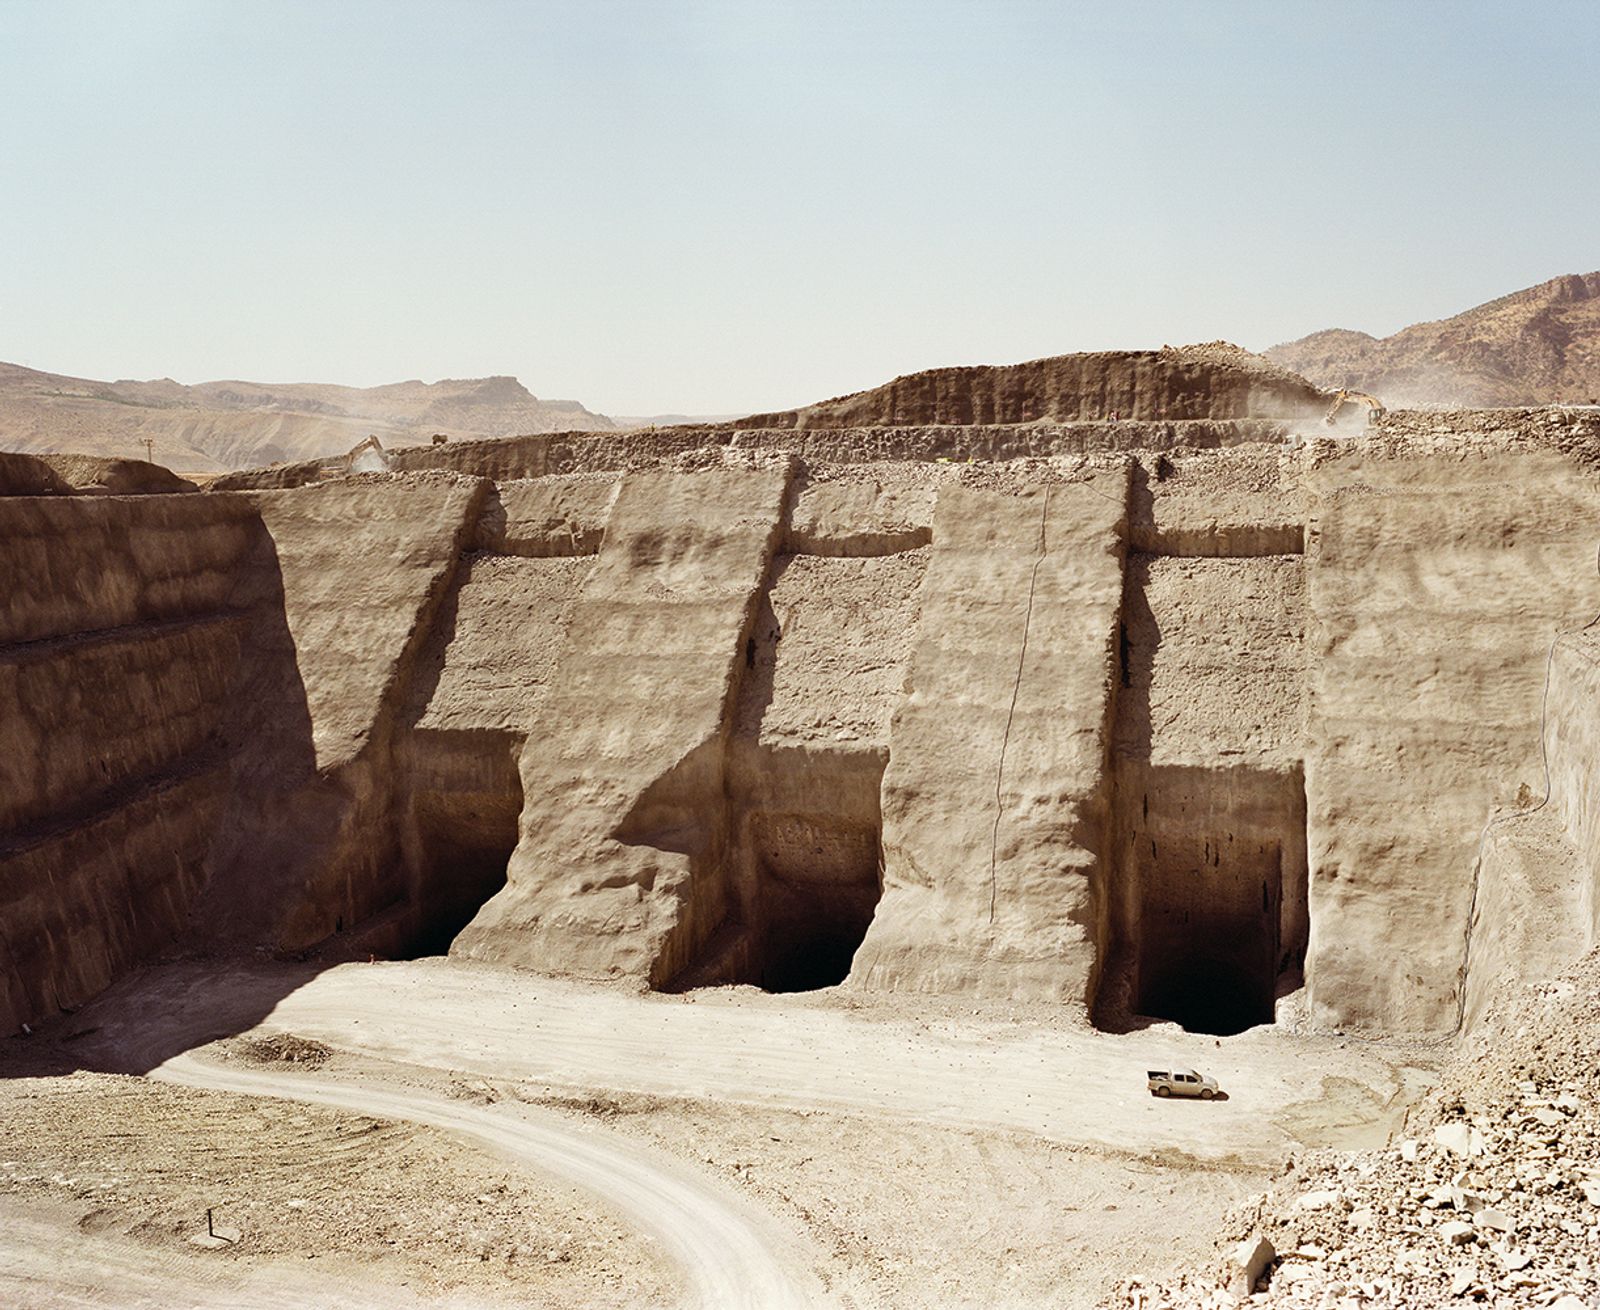 © Mathias Depardon - Image from the GOLD RIVERS photography project